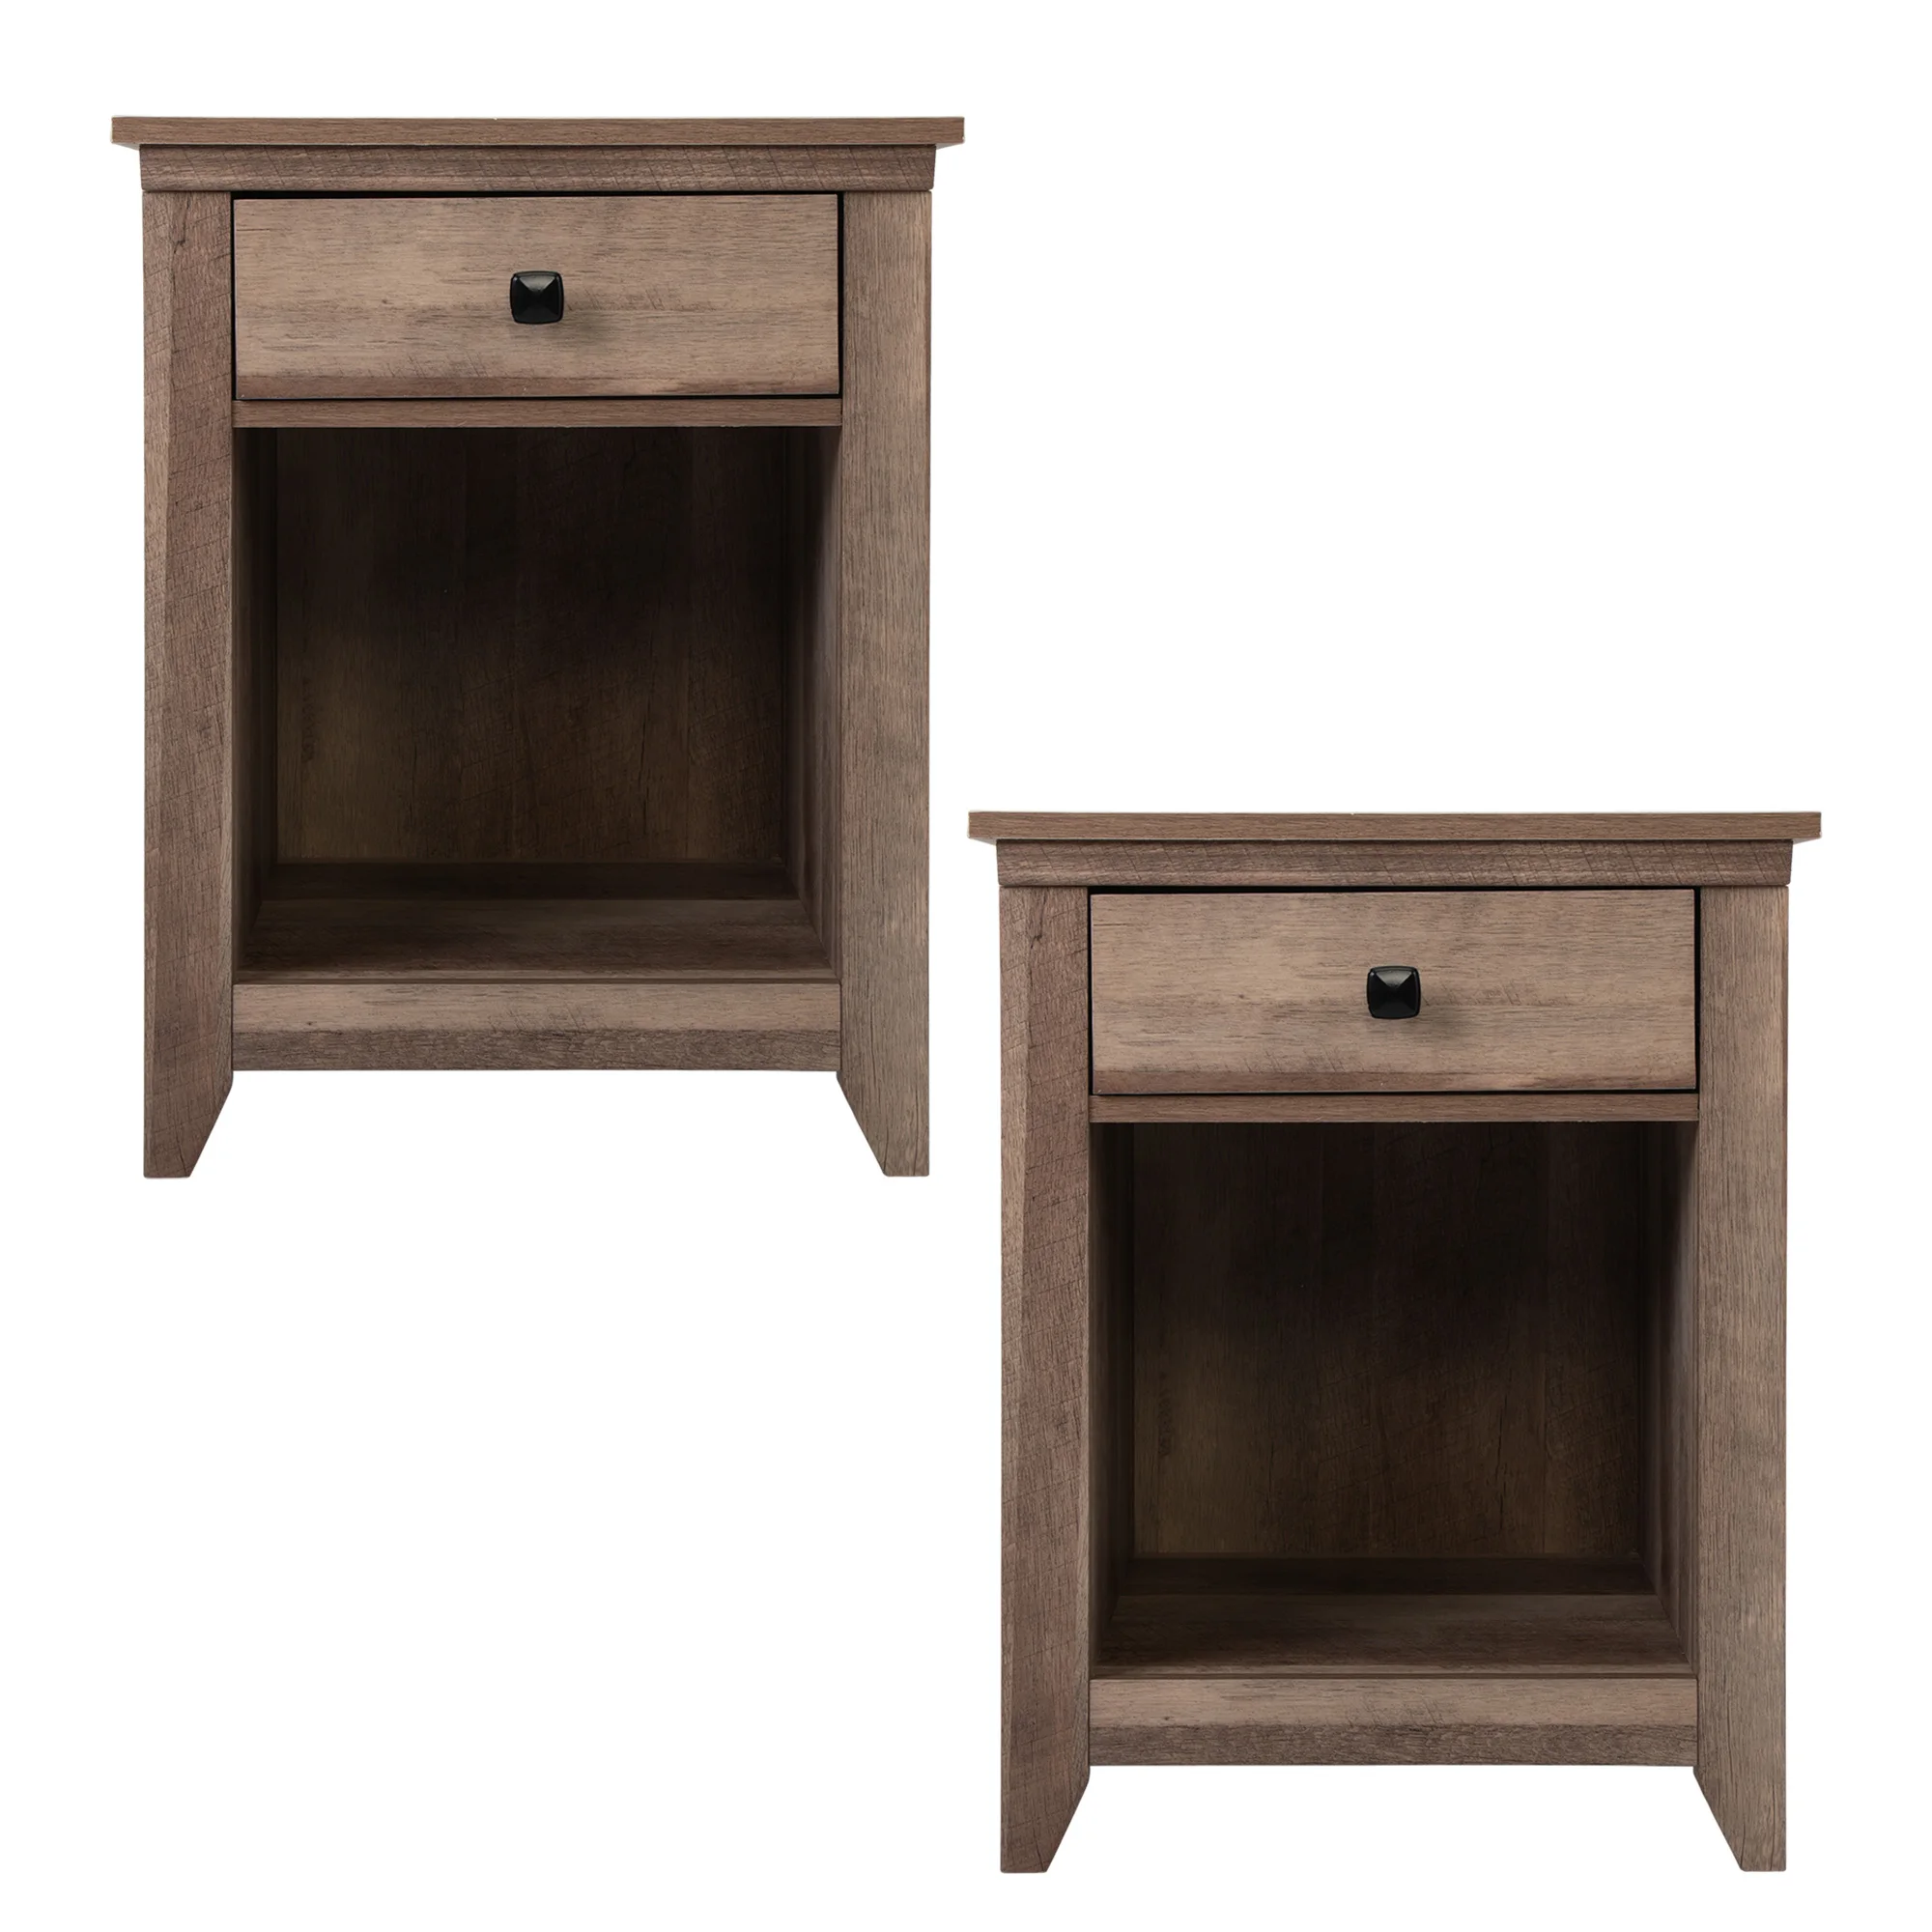 

Set of 2 Farmhouse Nightstand Wood Bedside Table End Table with Drawer and Open Compartment Light Brown Bedroom Furniture